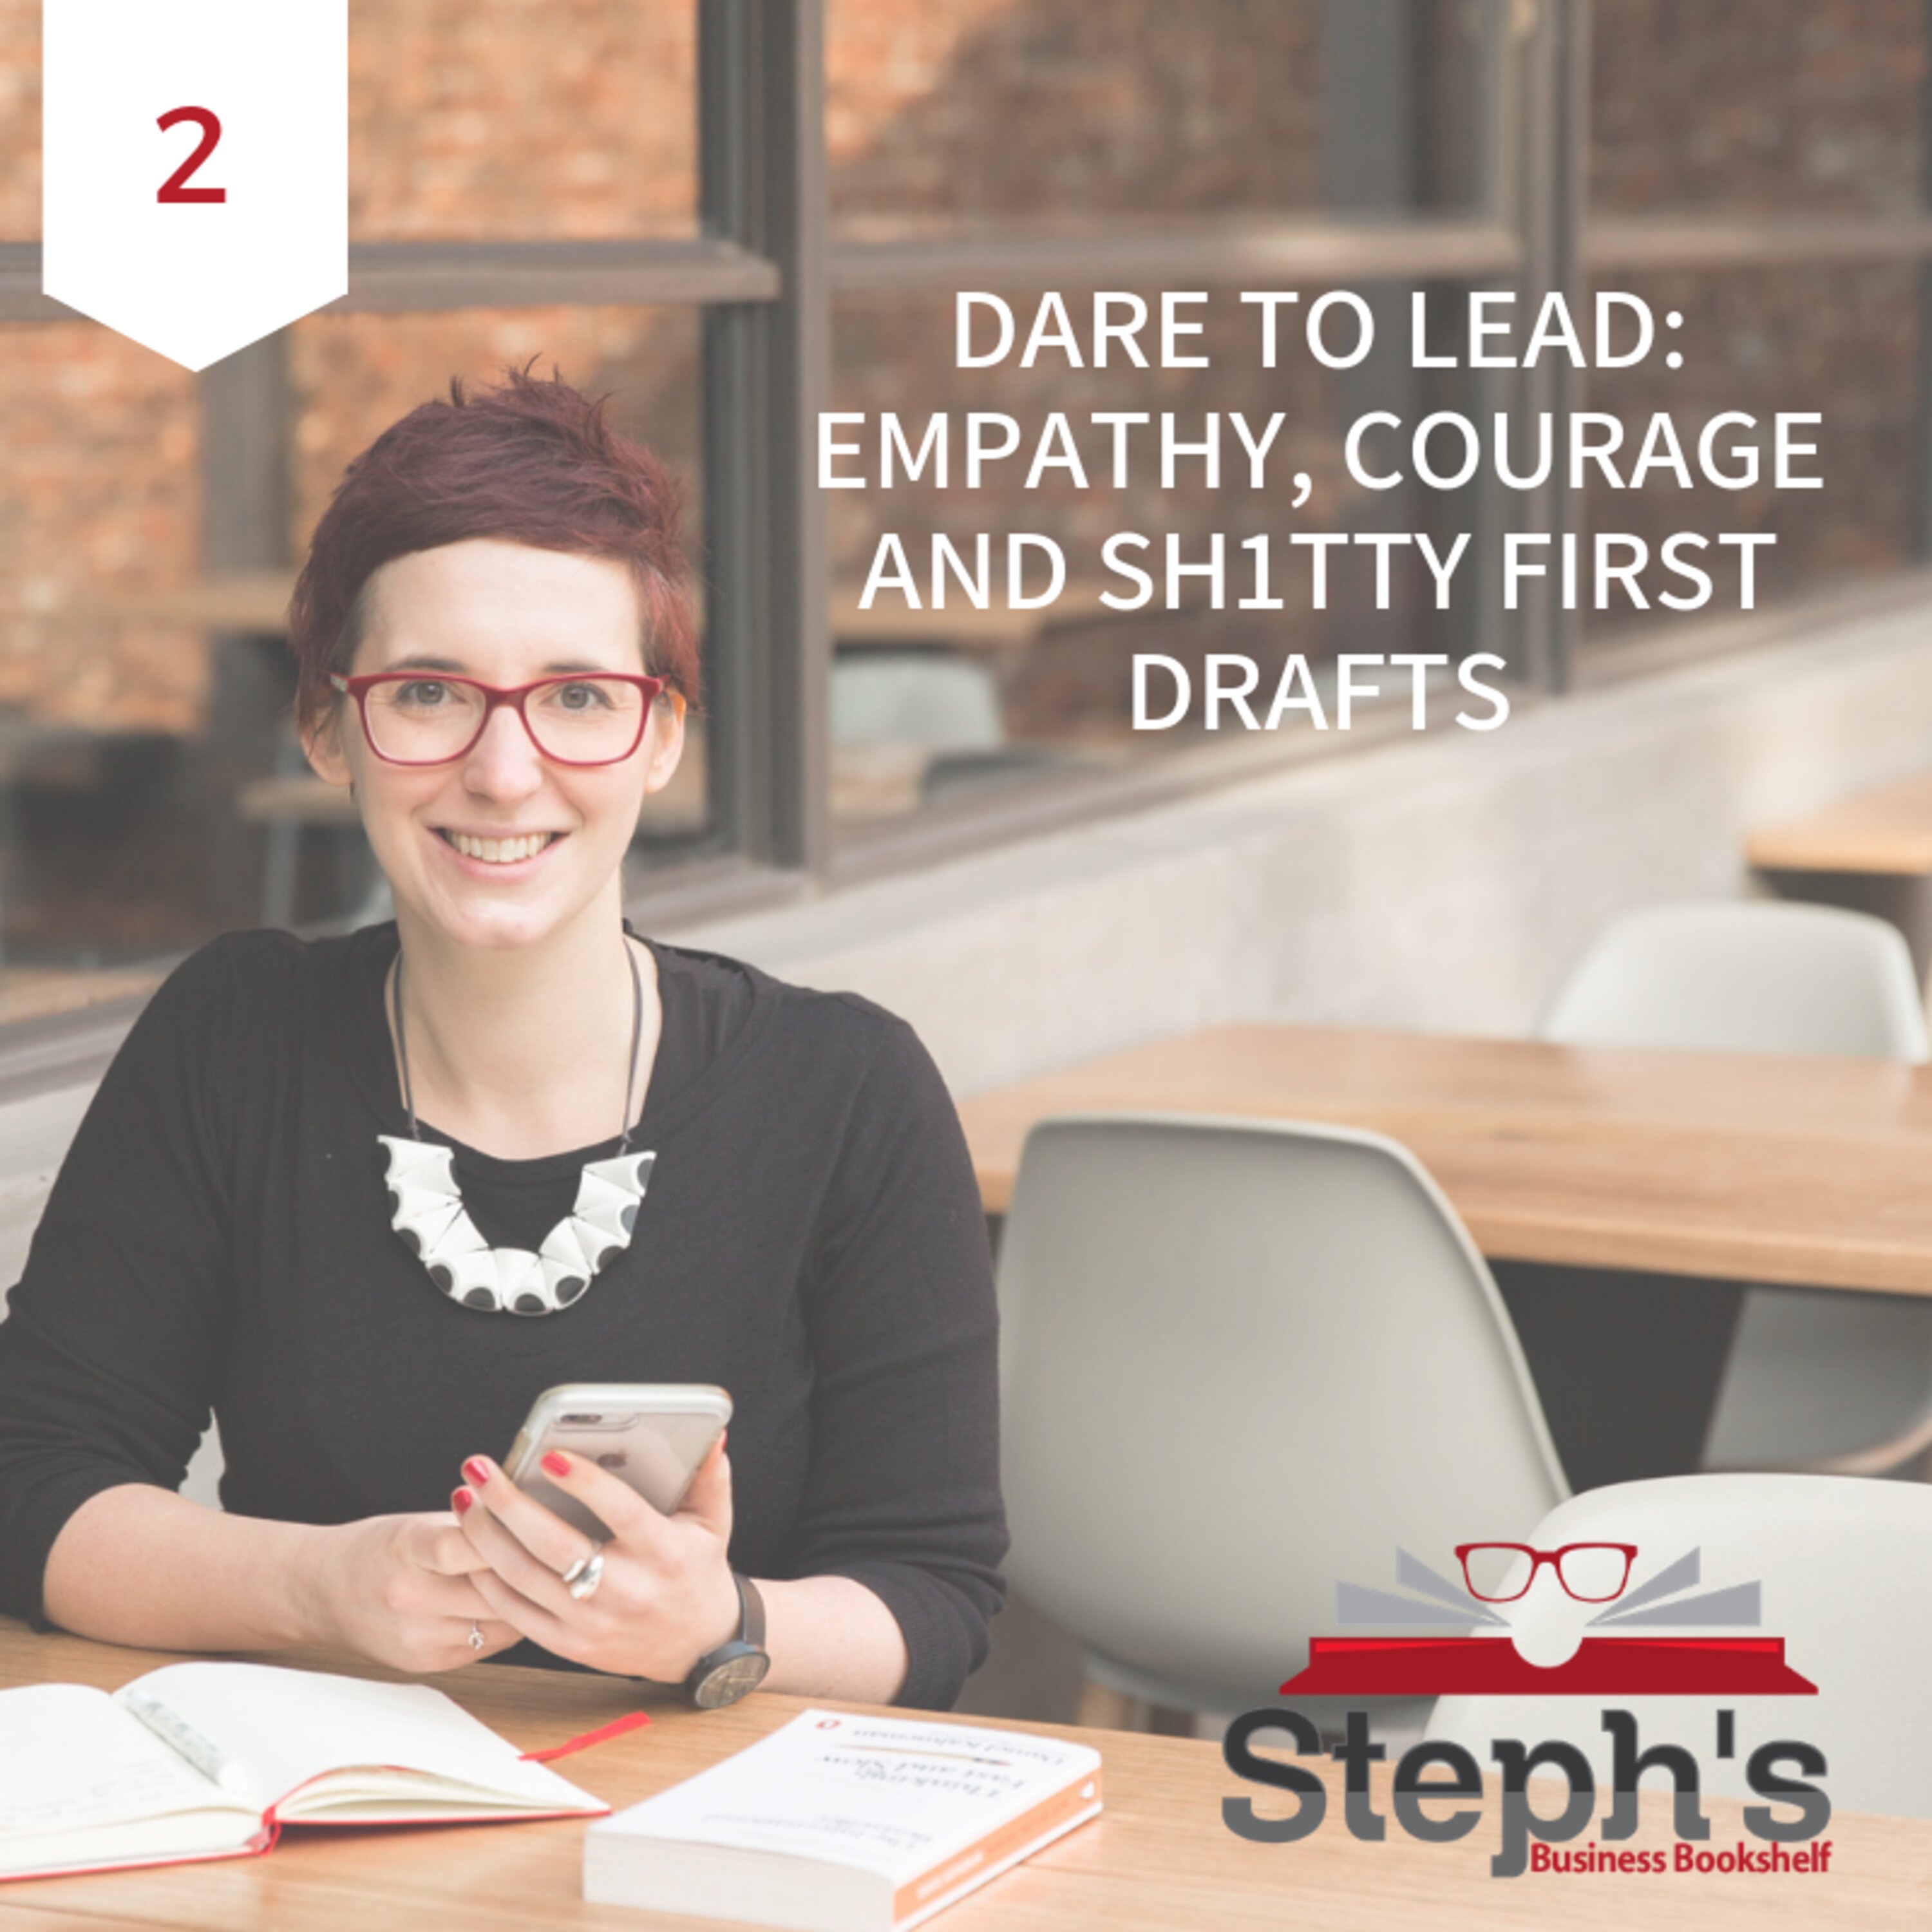 Dare to Lead by Brené Brown: Empathy, courage and sh1tty first drafts Image